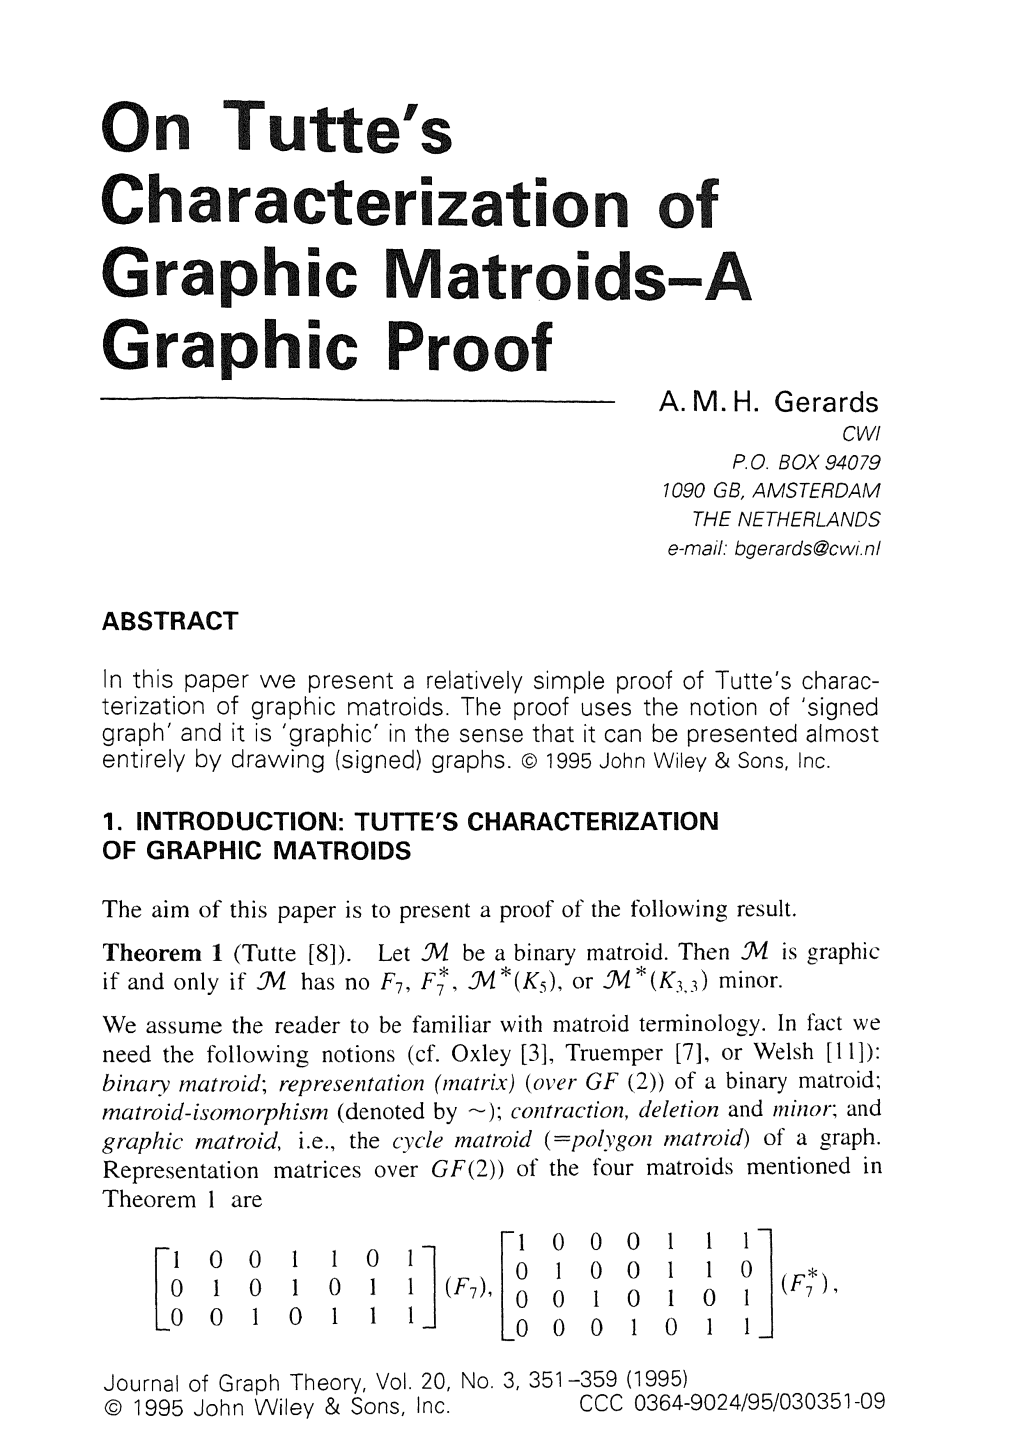 On Tutte's Characterization of Graphic Matroids-A Graphic Proof A